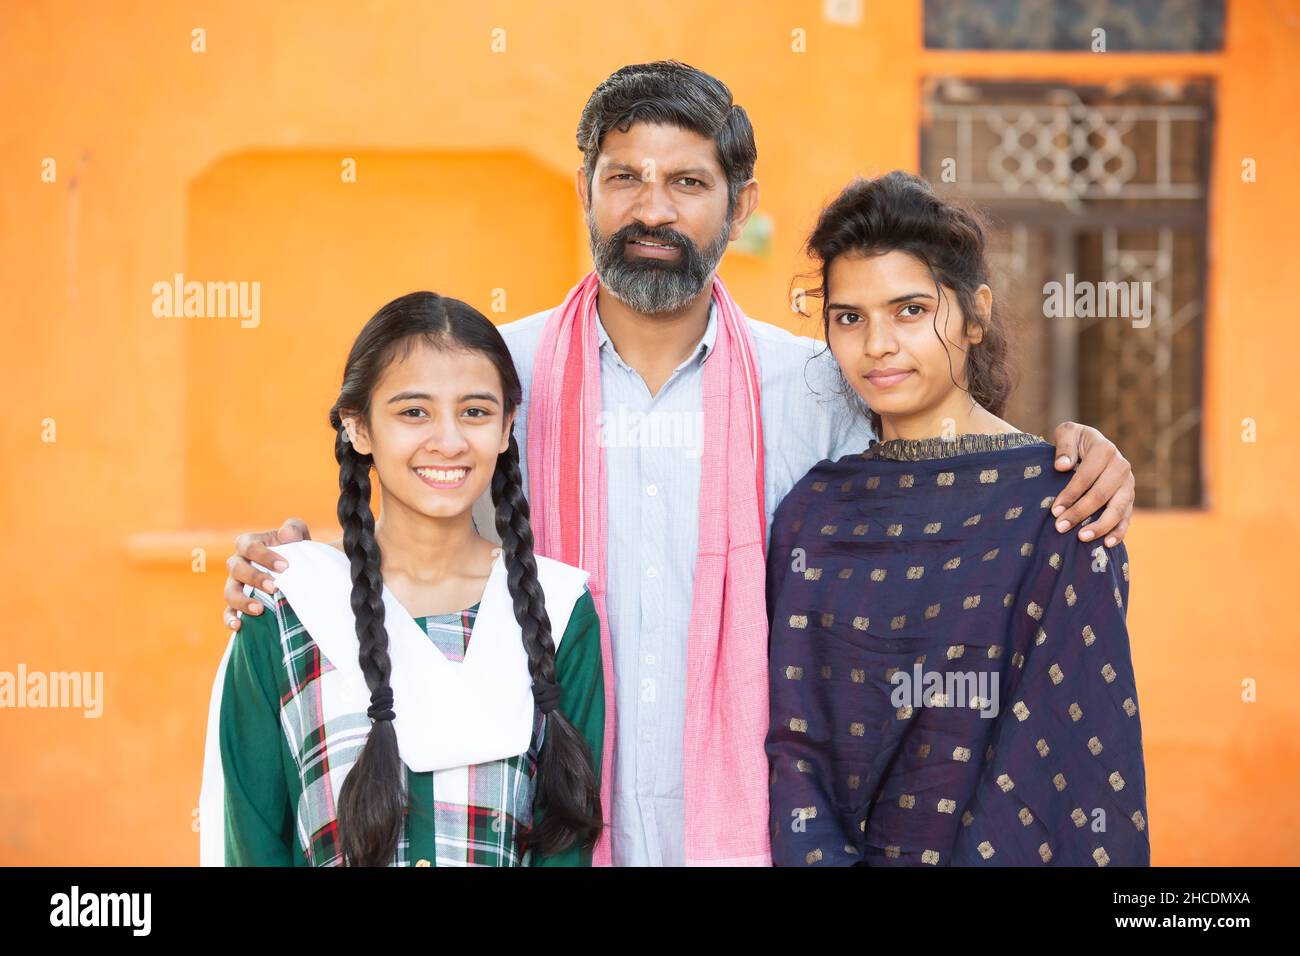 Portrait of happy traditional Indian father with his two young beautiful daughters showing his love and support, small family, rural india. beard Man Stock Photo